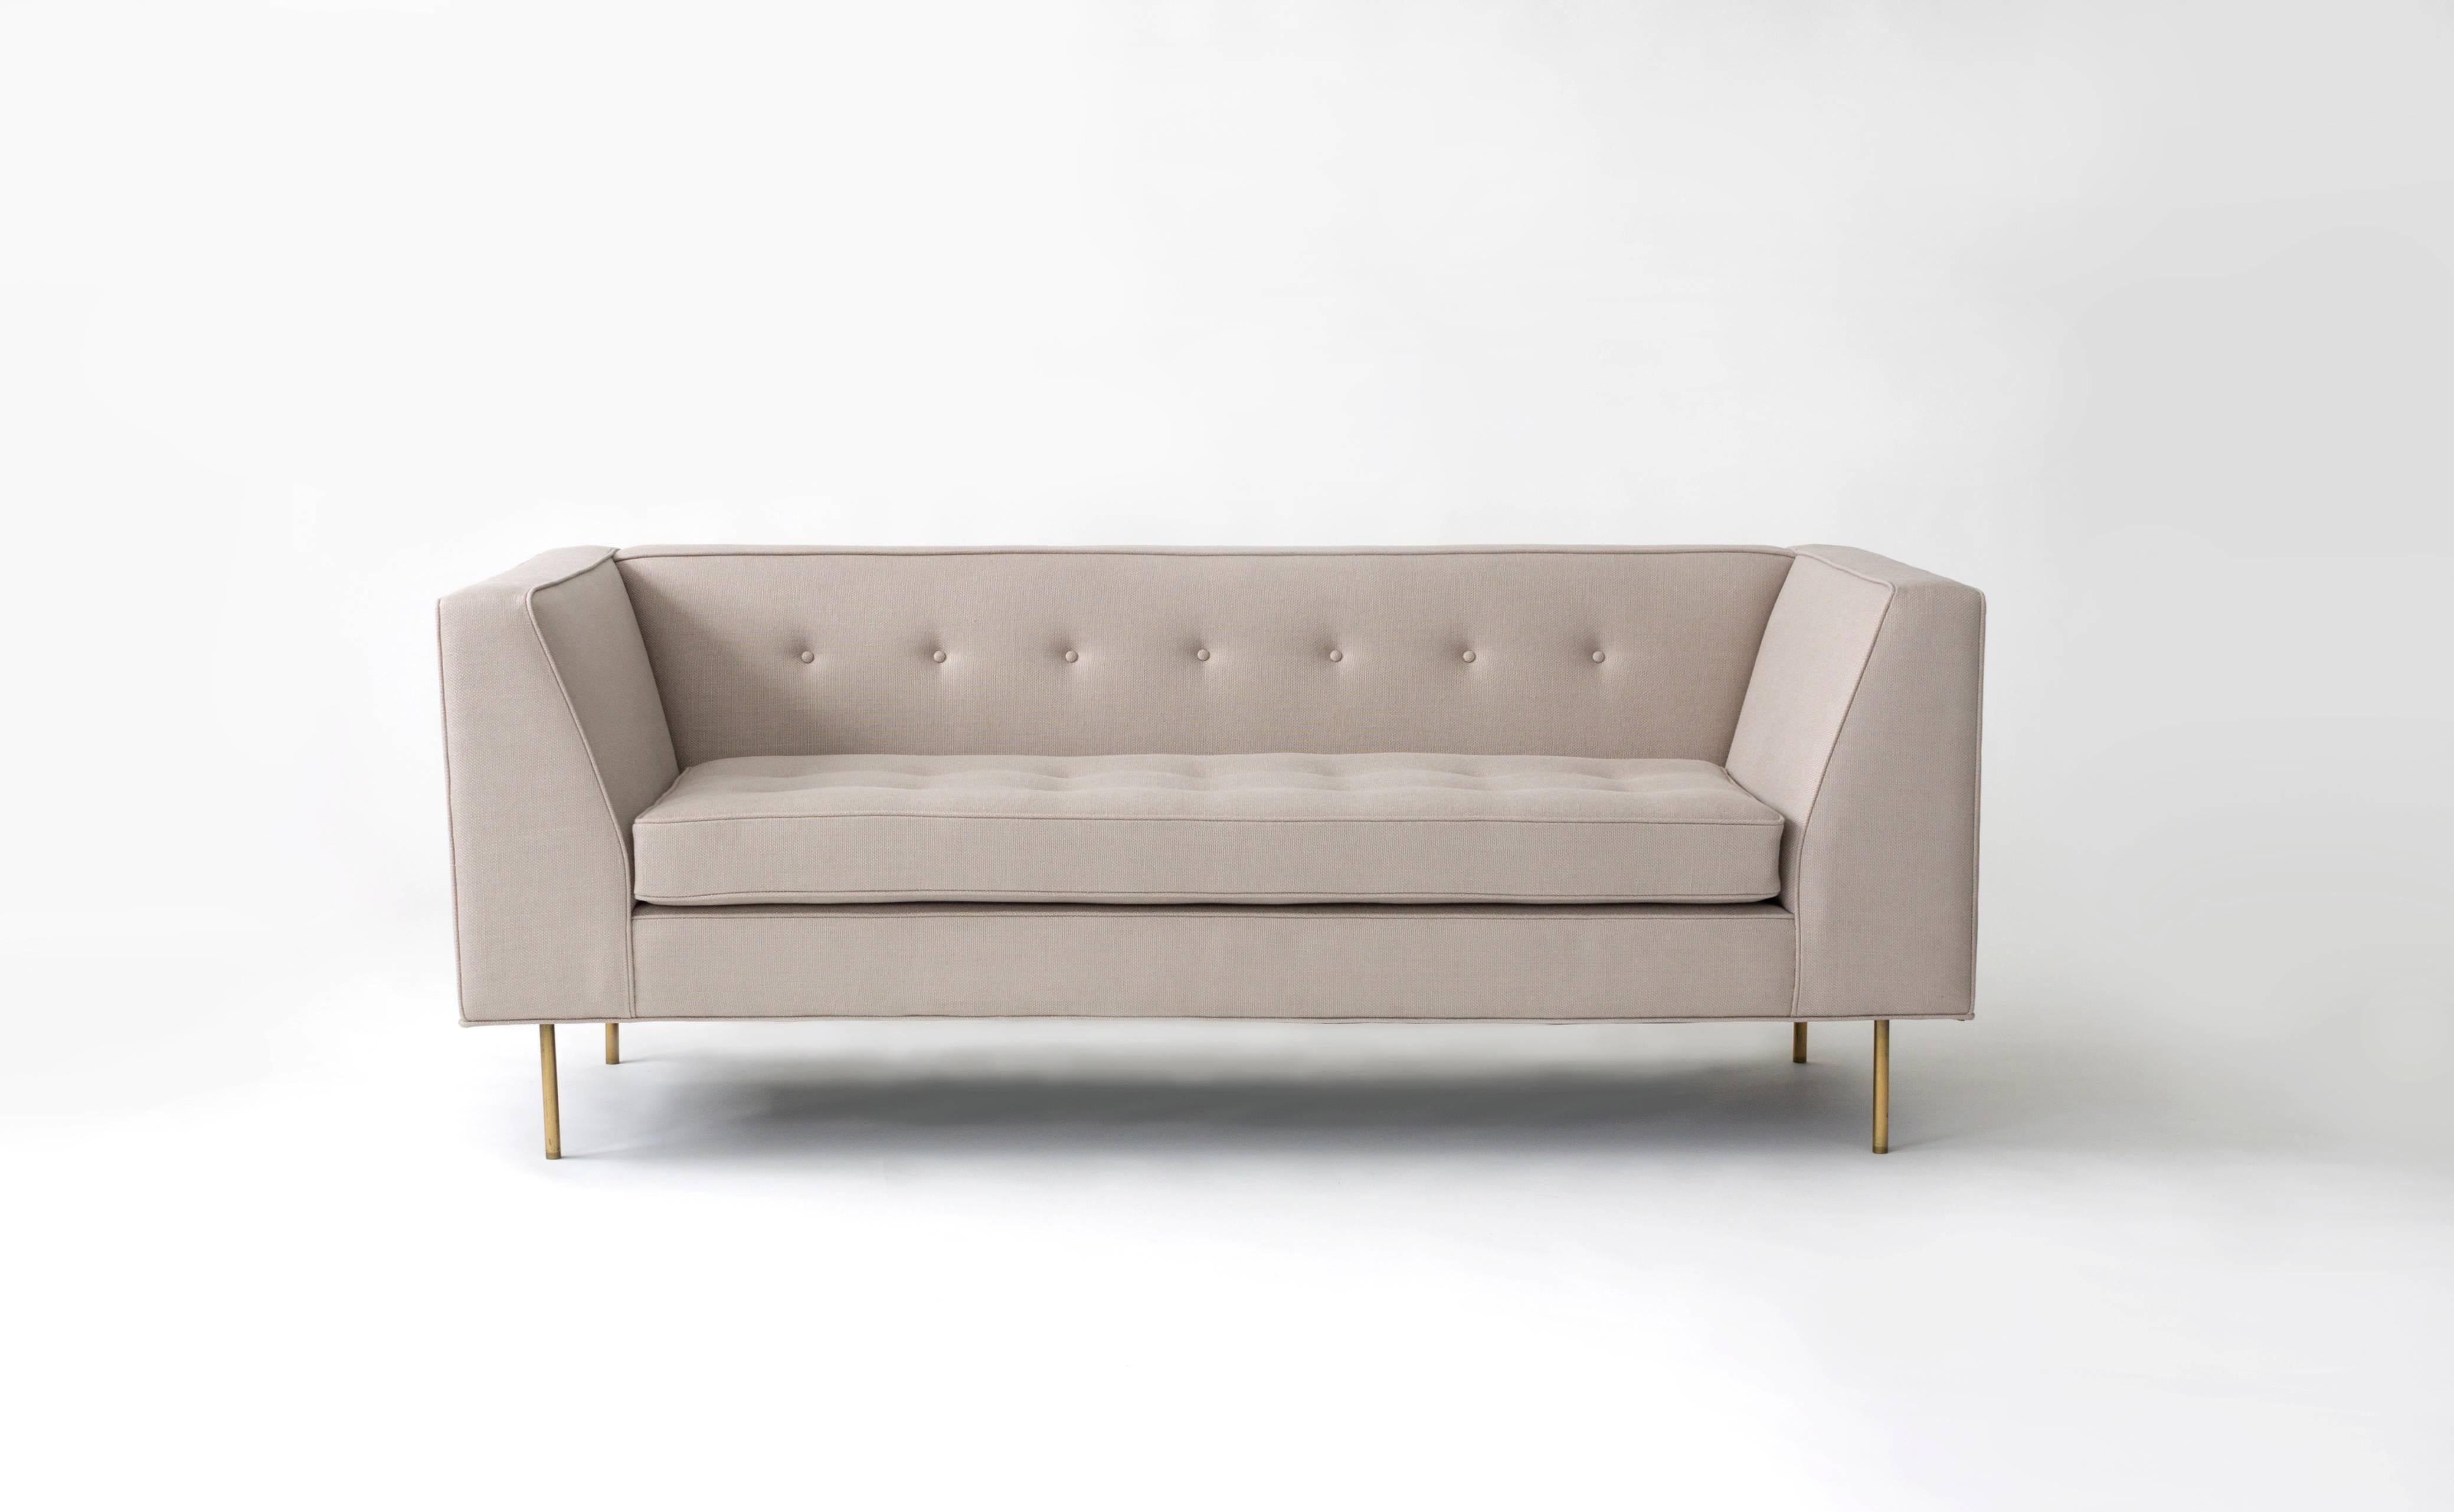 Harvey Probber sofa newly reupholstered in a linen blend.